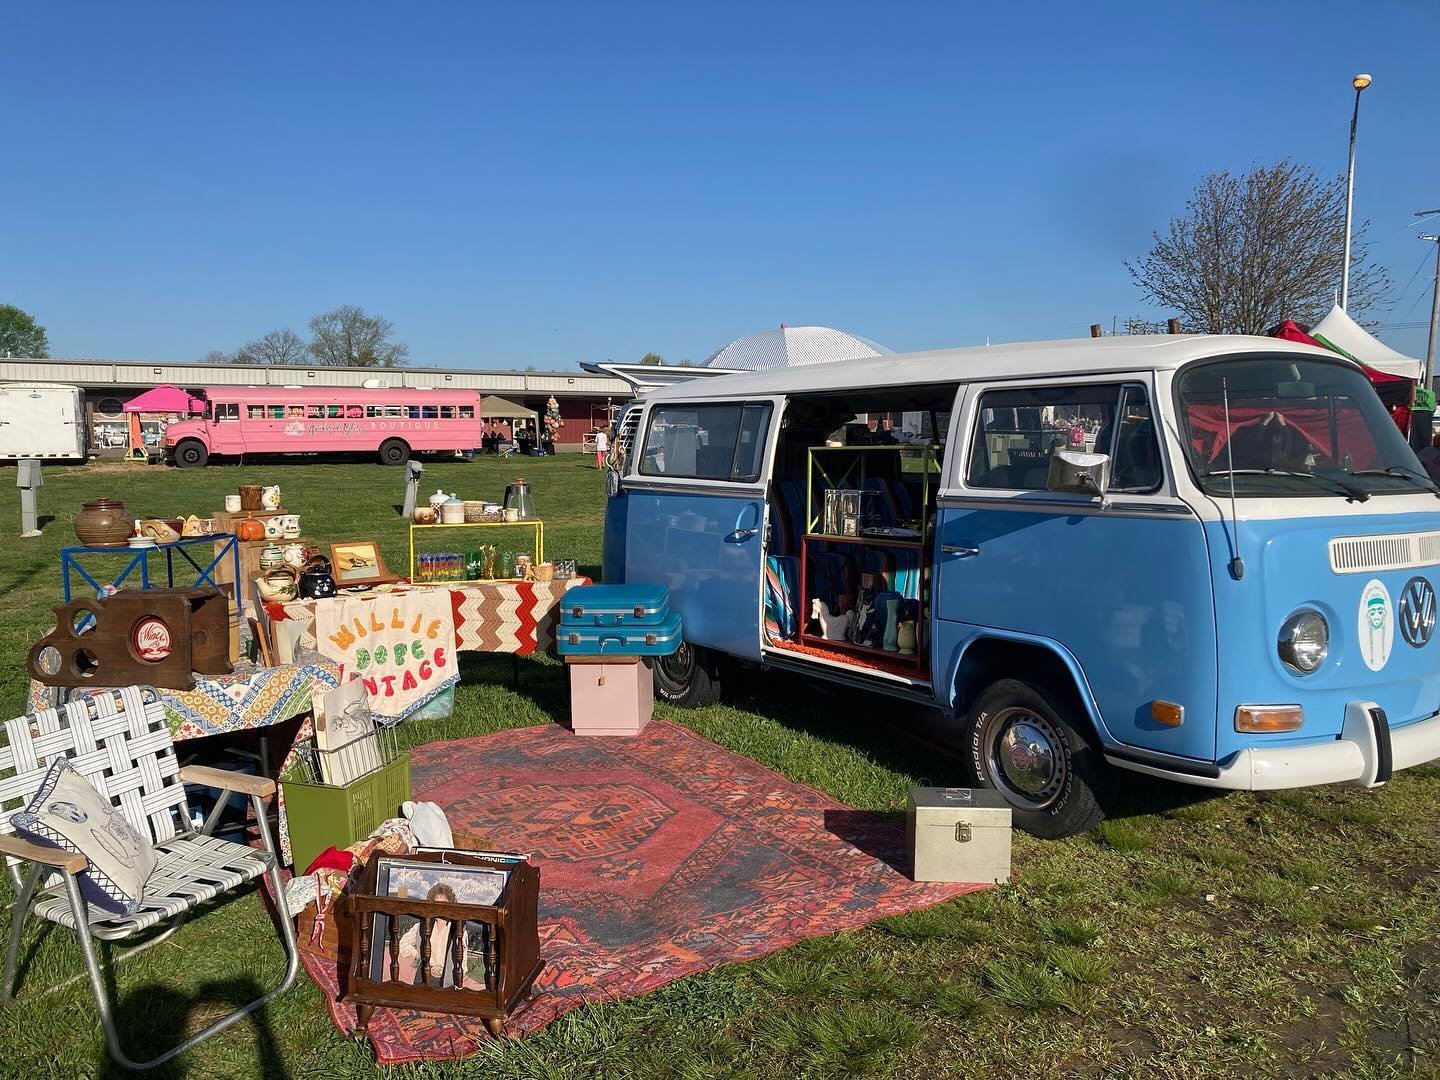 @willie_dope_vintage will be joining us at our next event in Tulsa 5/18! Shop from their vintage VW bus for a curated selection of home goods!*photos from a past event, our shows are always indoor!*